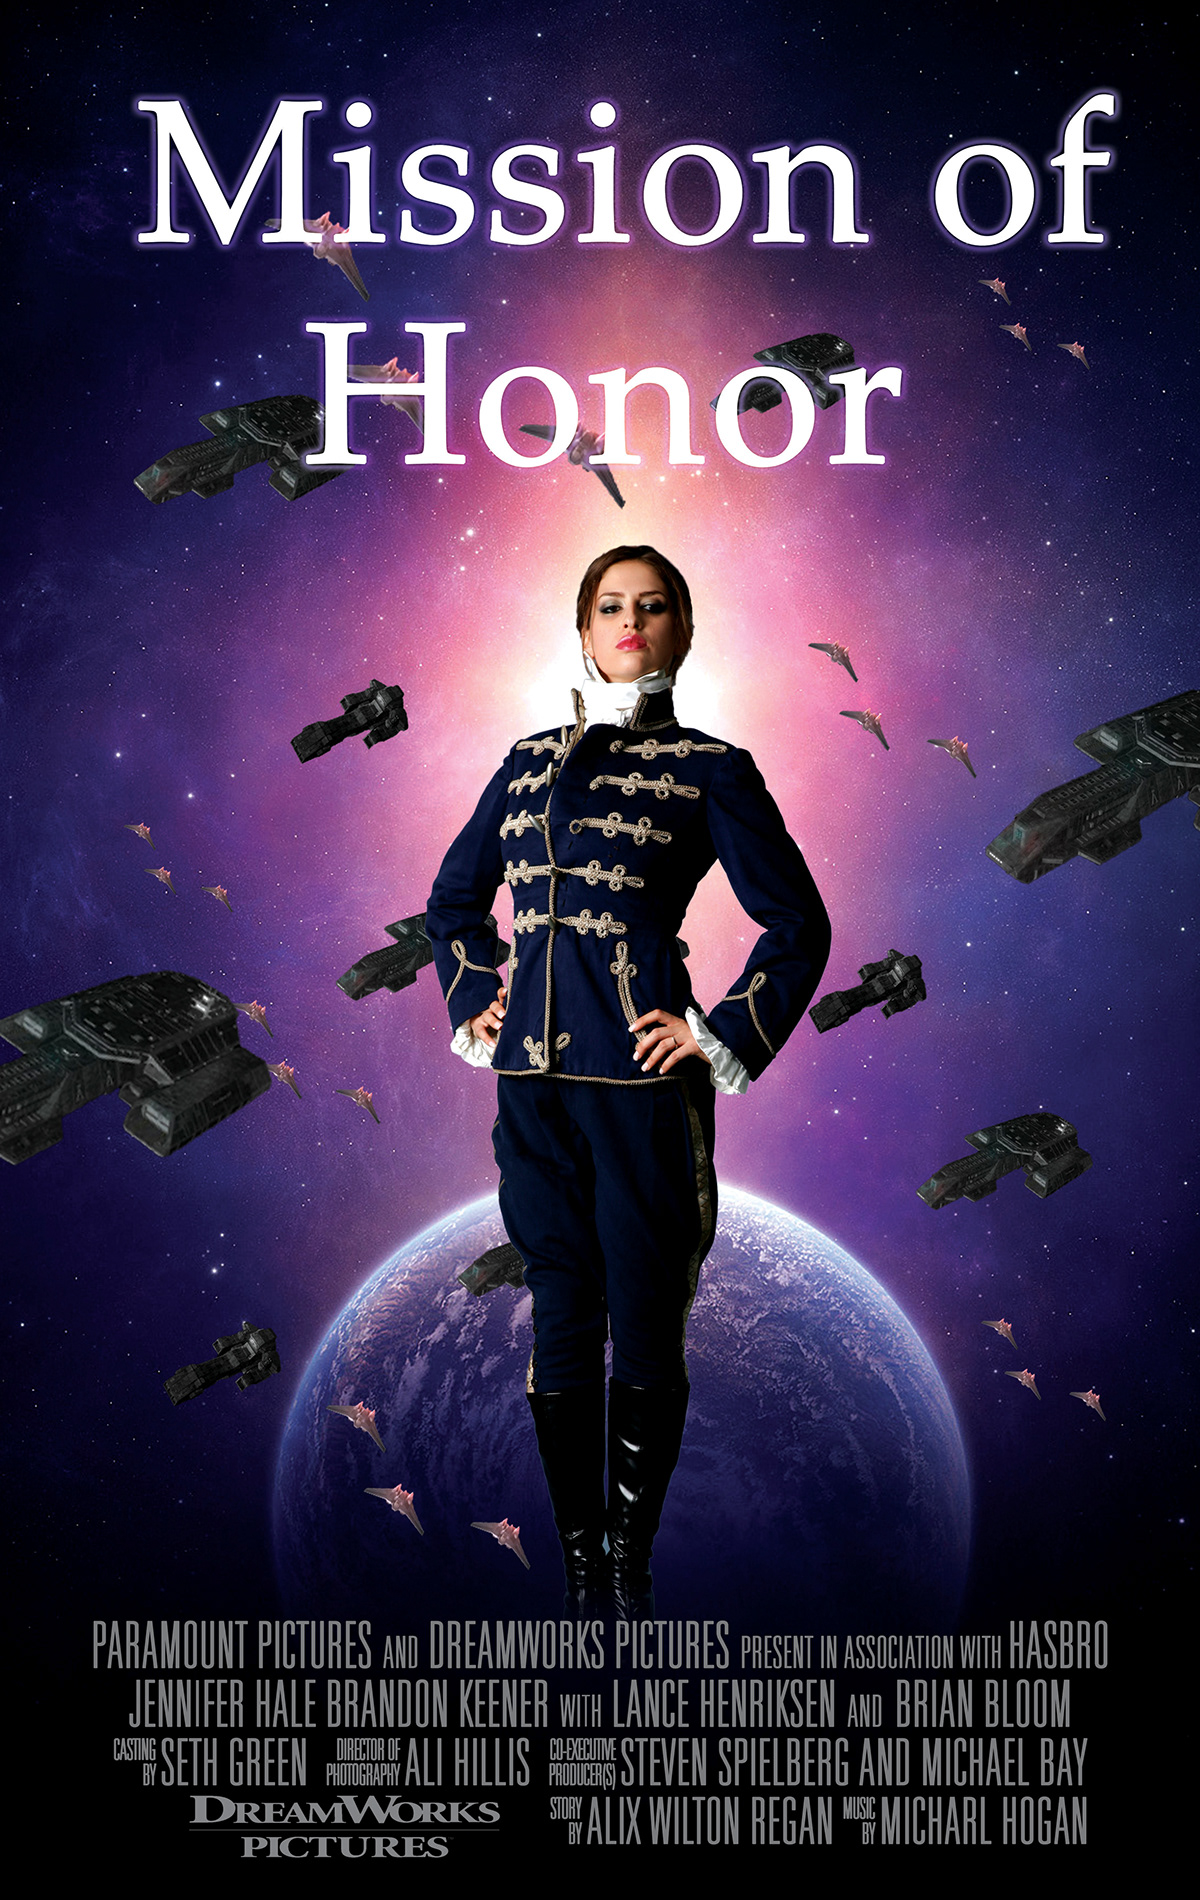 mission of honor Mission of Honor movie poster advertisement